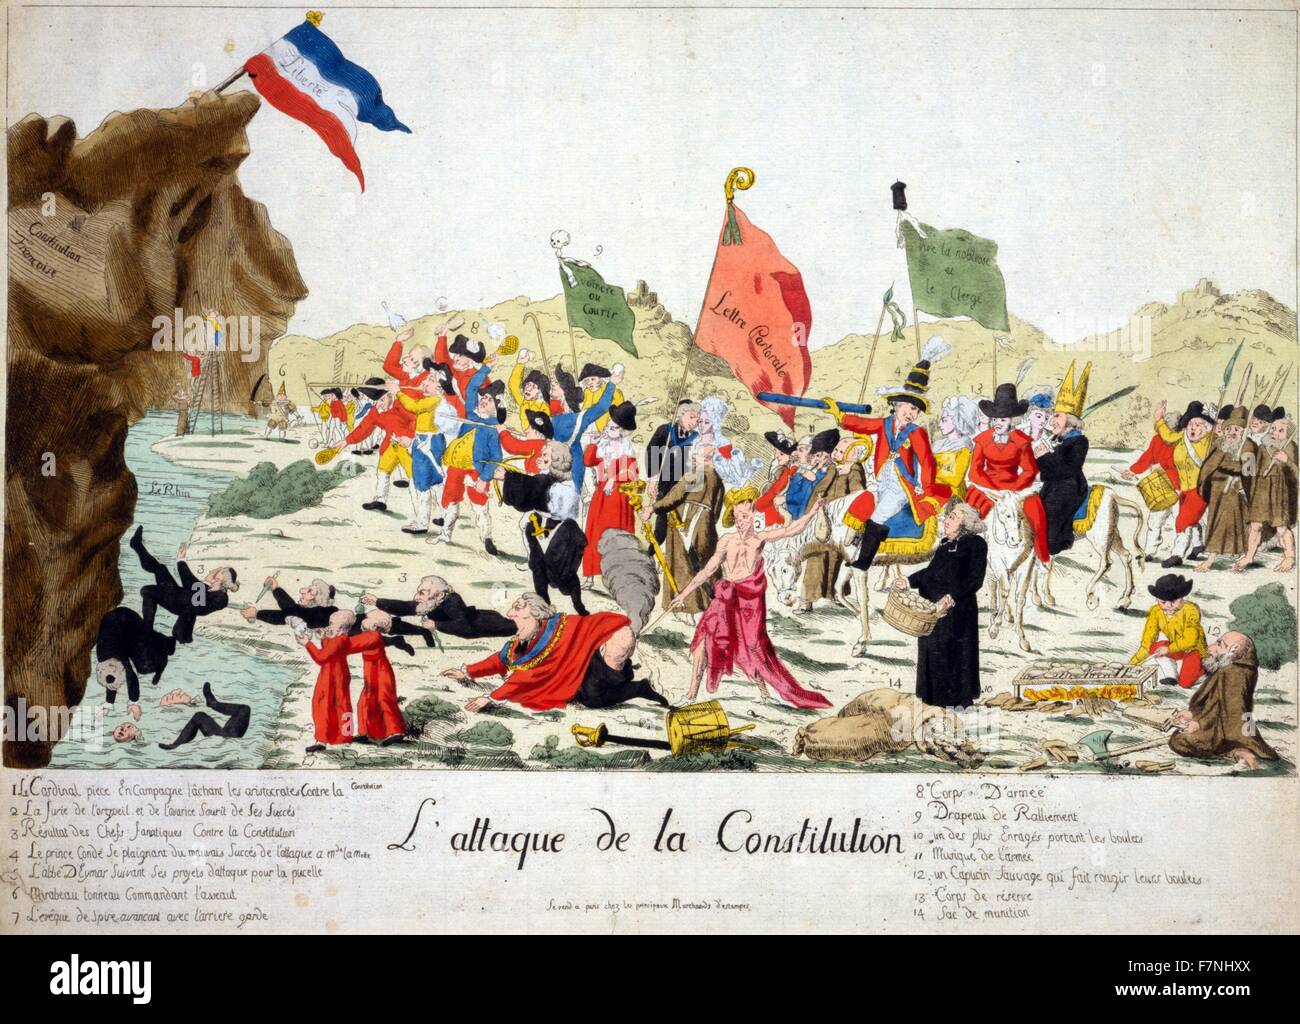 L'Attaque de la constitution 1792. Cartoon showing clergy, nobility, and fugitive counterrevolutionaries, carrying flags labeled 'Vive la noblesse et le Clerge', 'Lettre Pastorale', and 'Voincre ou Courir', attacking a rock, identified as the 'Constitution Francoise', on which sits the French flag labeled 'Liberté' on the far left, across the Rhine. Stock Photo